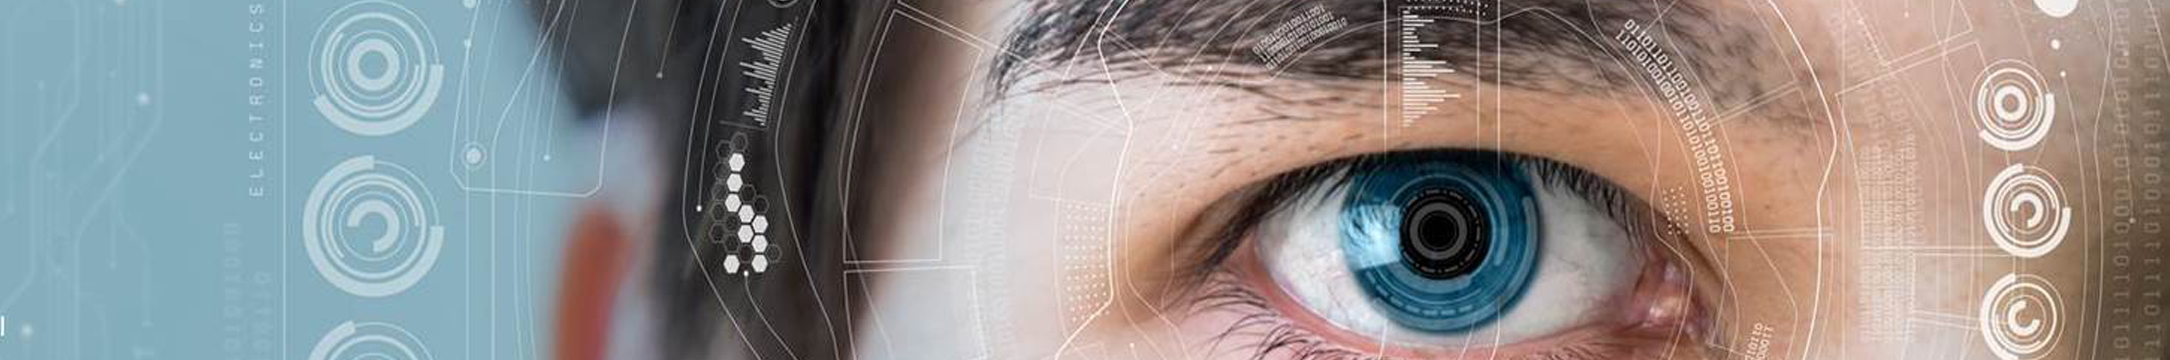 What Are The Different Types Of Laser Eye Surgery